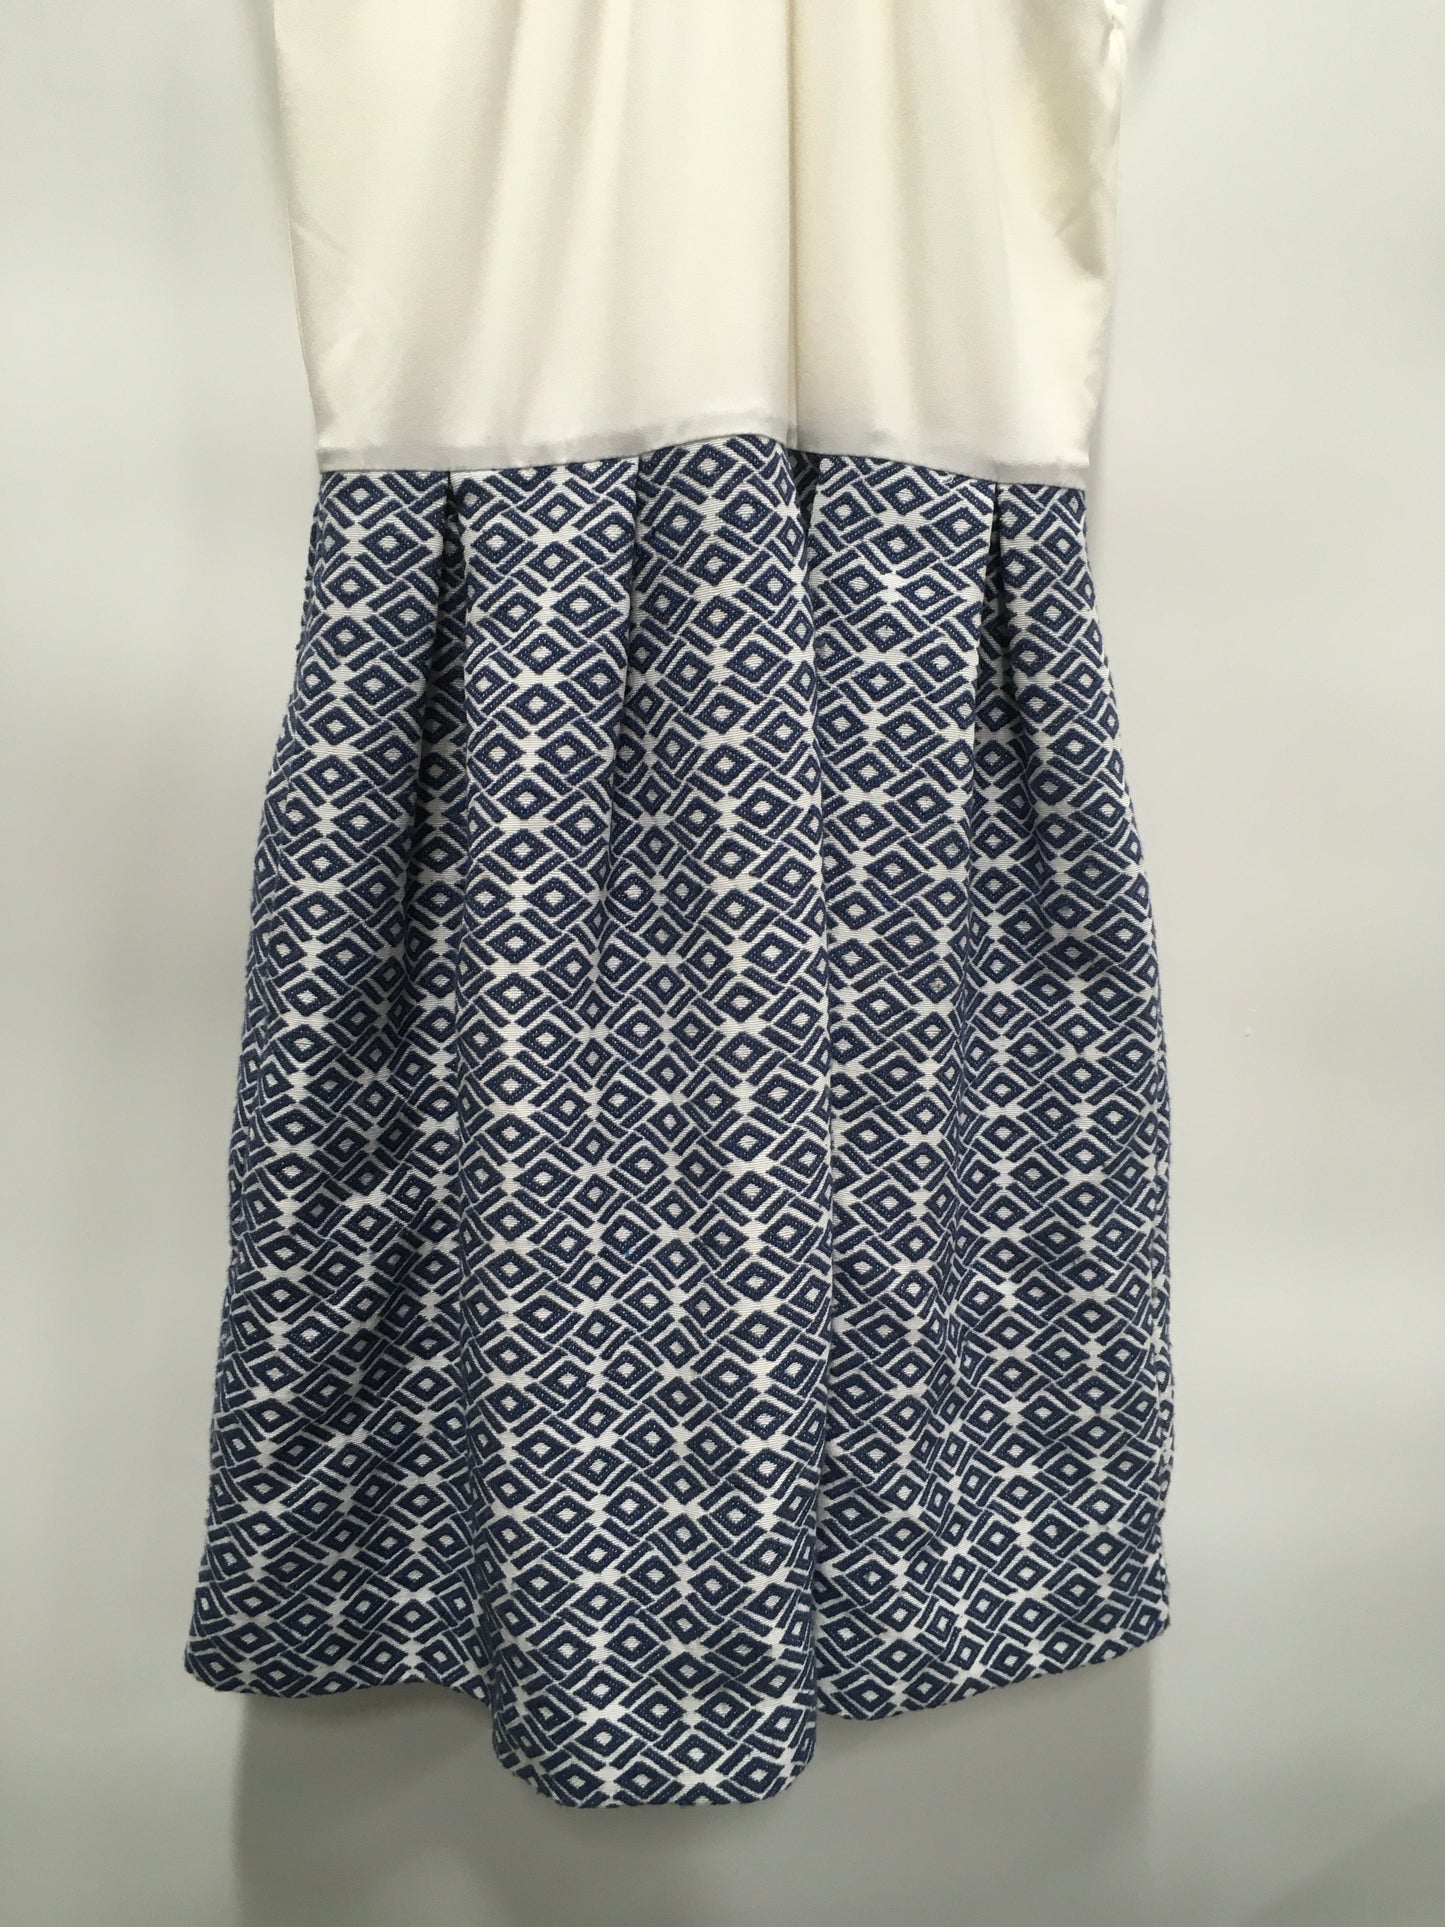 Blue & White Dress Casual Short Anthropologie, Size Petite   S